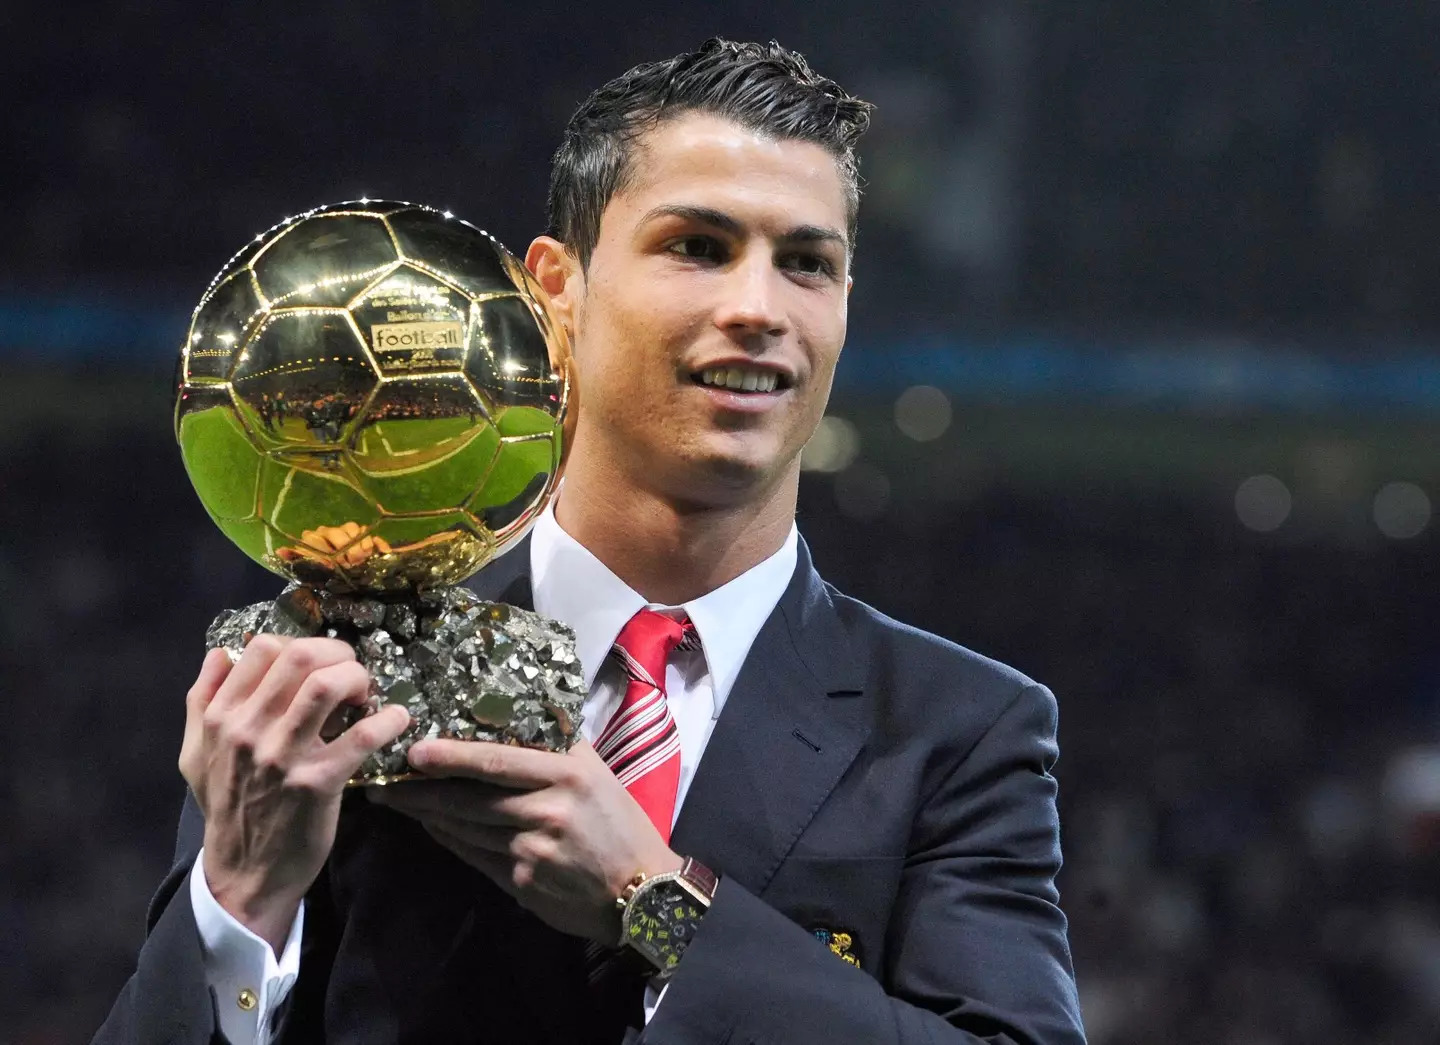 Cristiano Ronaldo pictured with the Ballon d'Or first place trophy in 2008 (